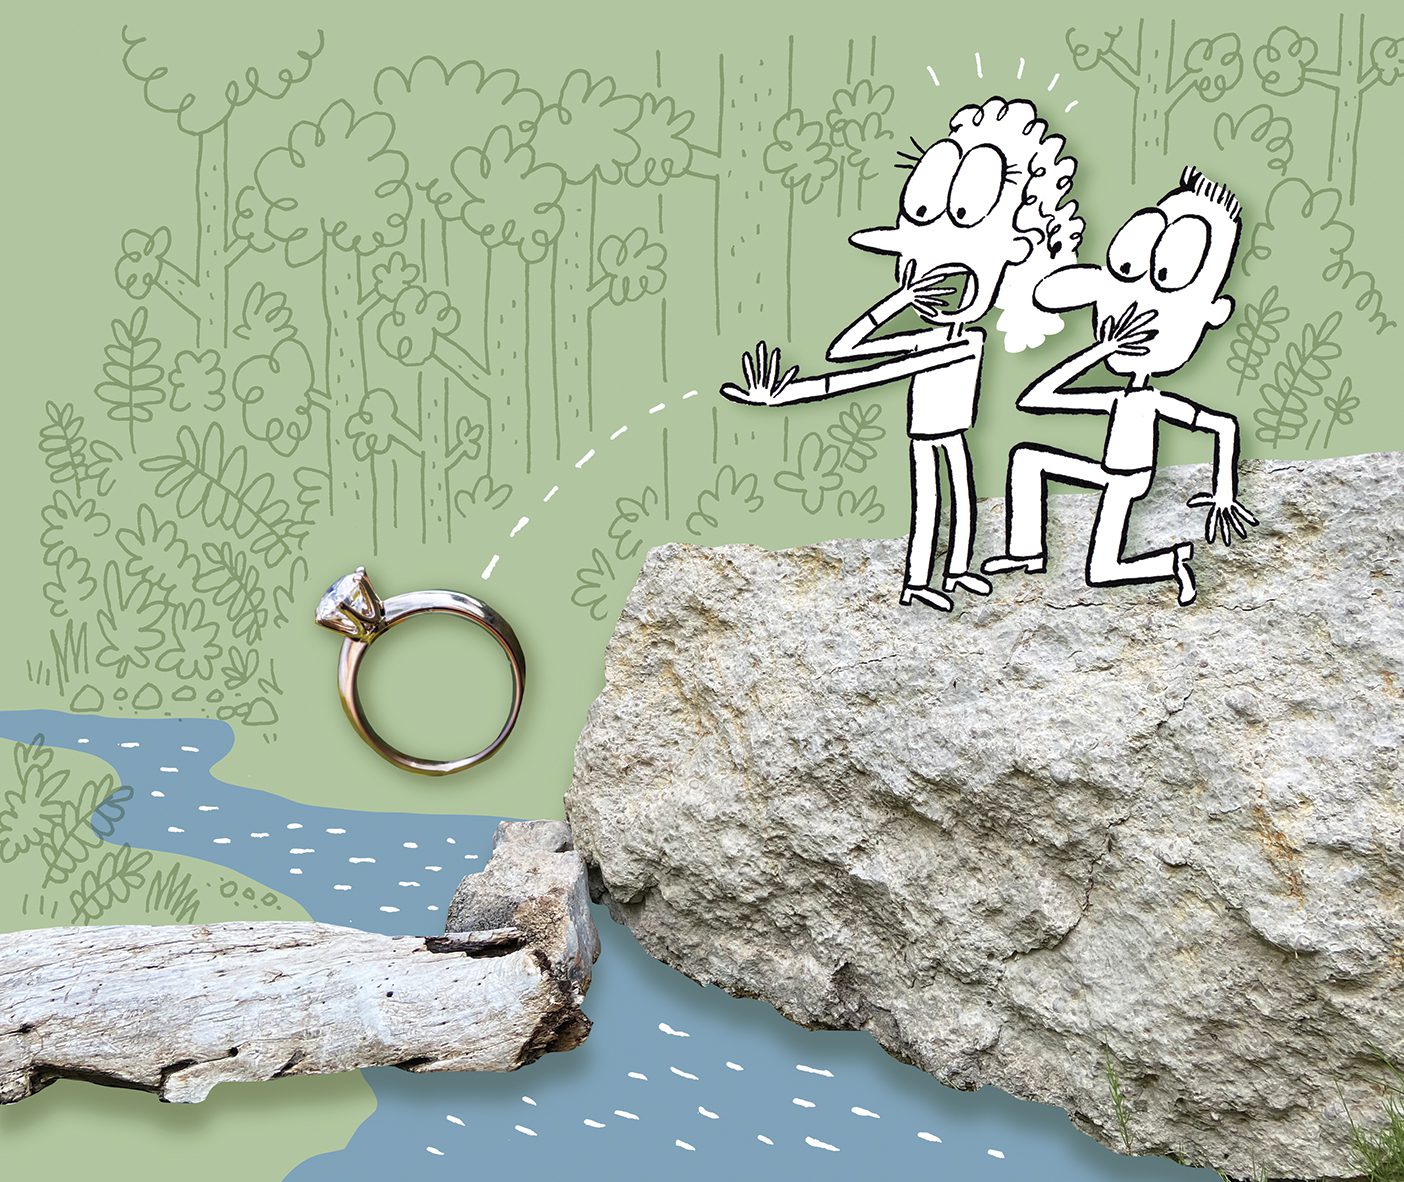 An engagement ring falls from the hand of a cartoon female standing on a rock by a river right after a proposal by a male student who is still on one knee.